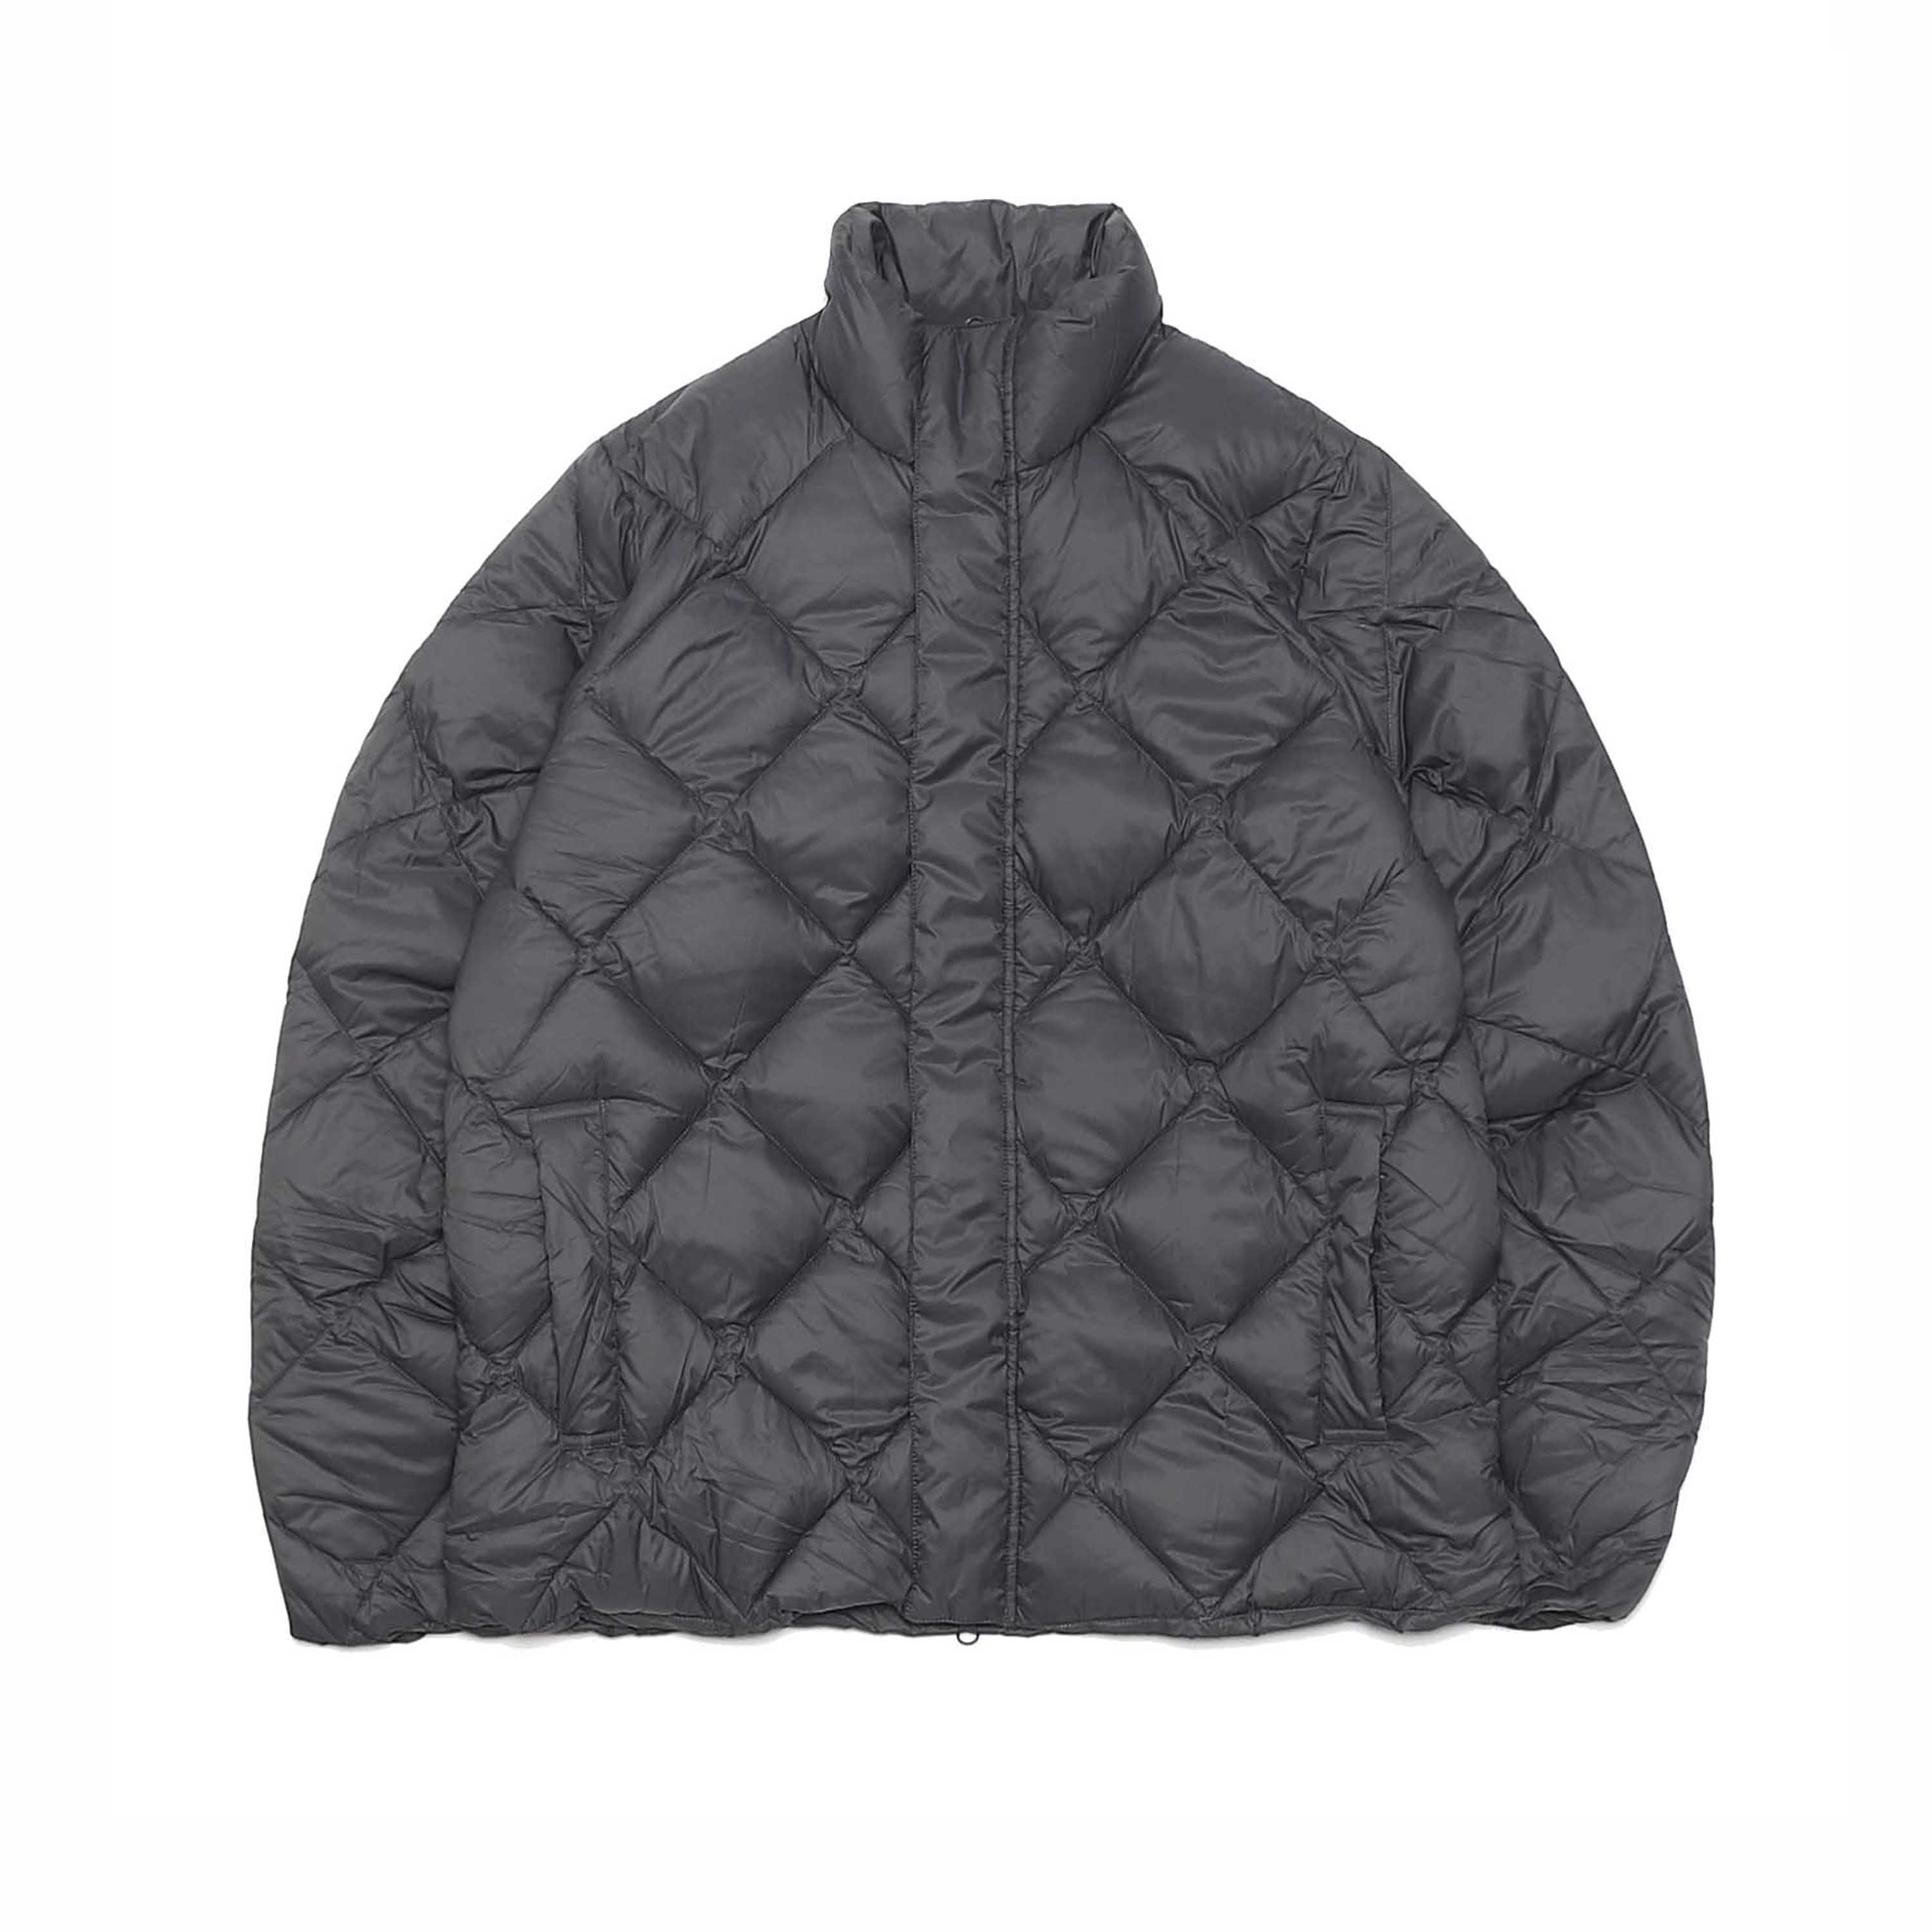 CITY PACKABLE HIGH NECK DOWN JACKET - CHARCOAL